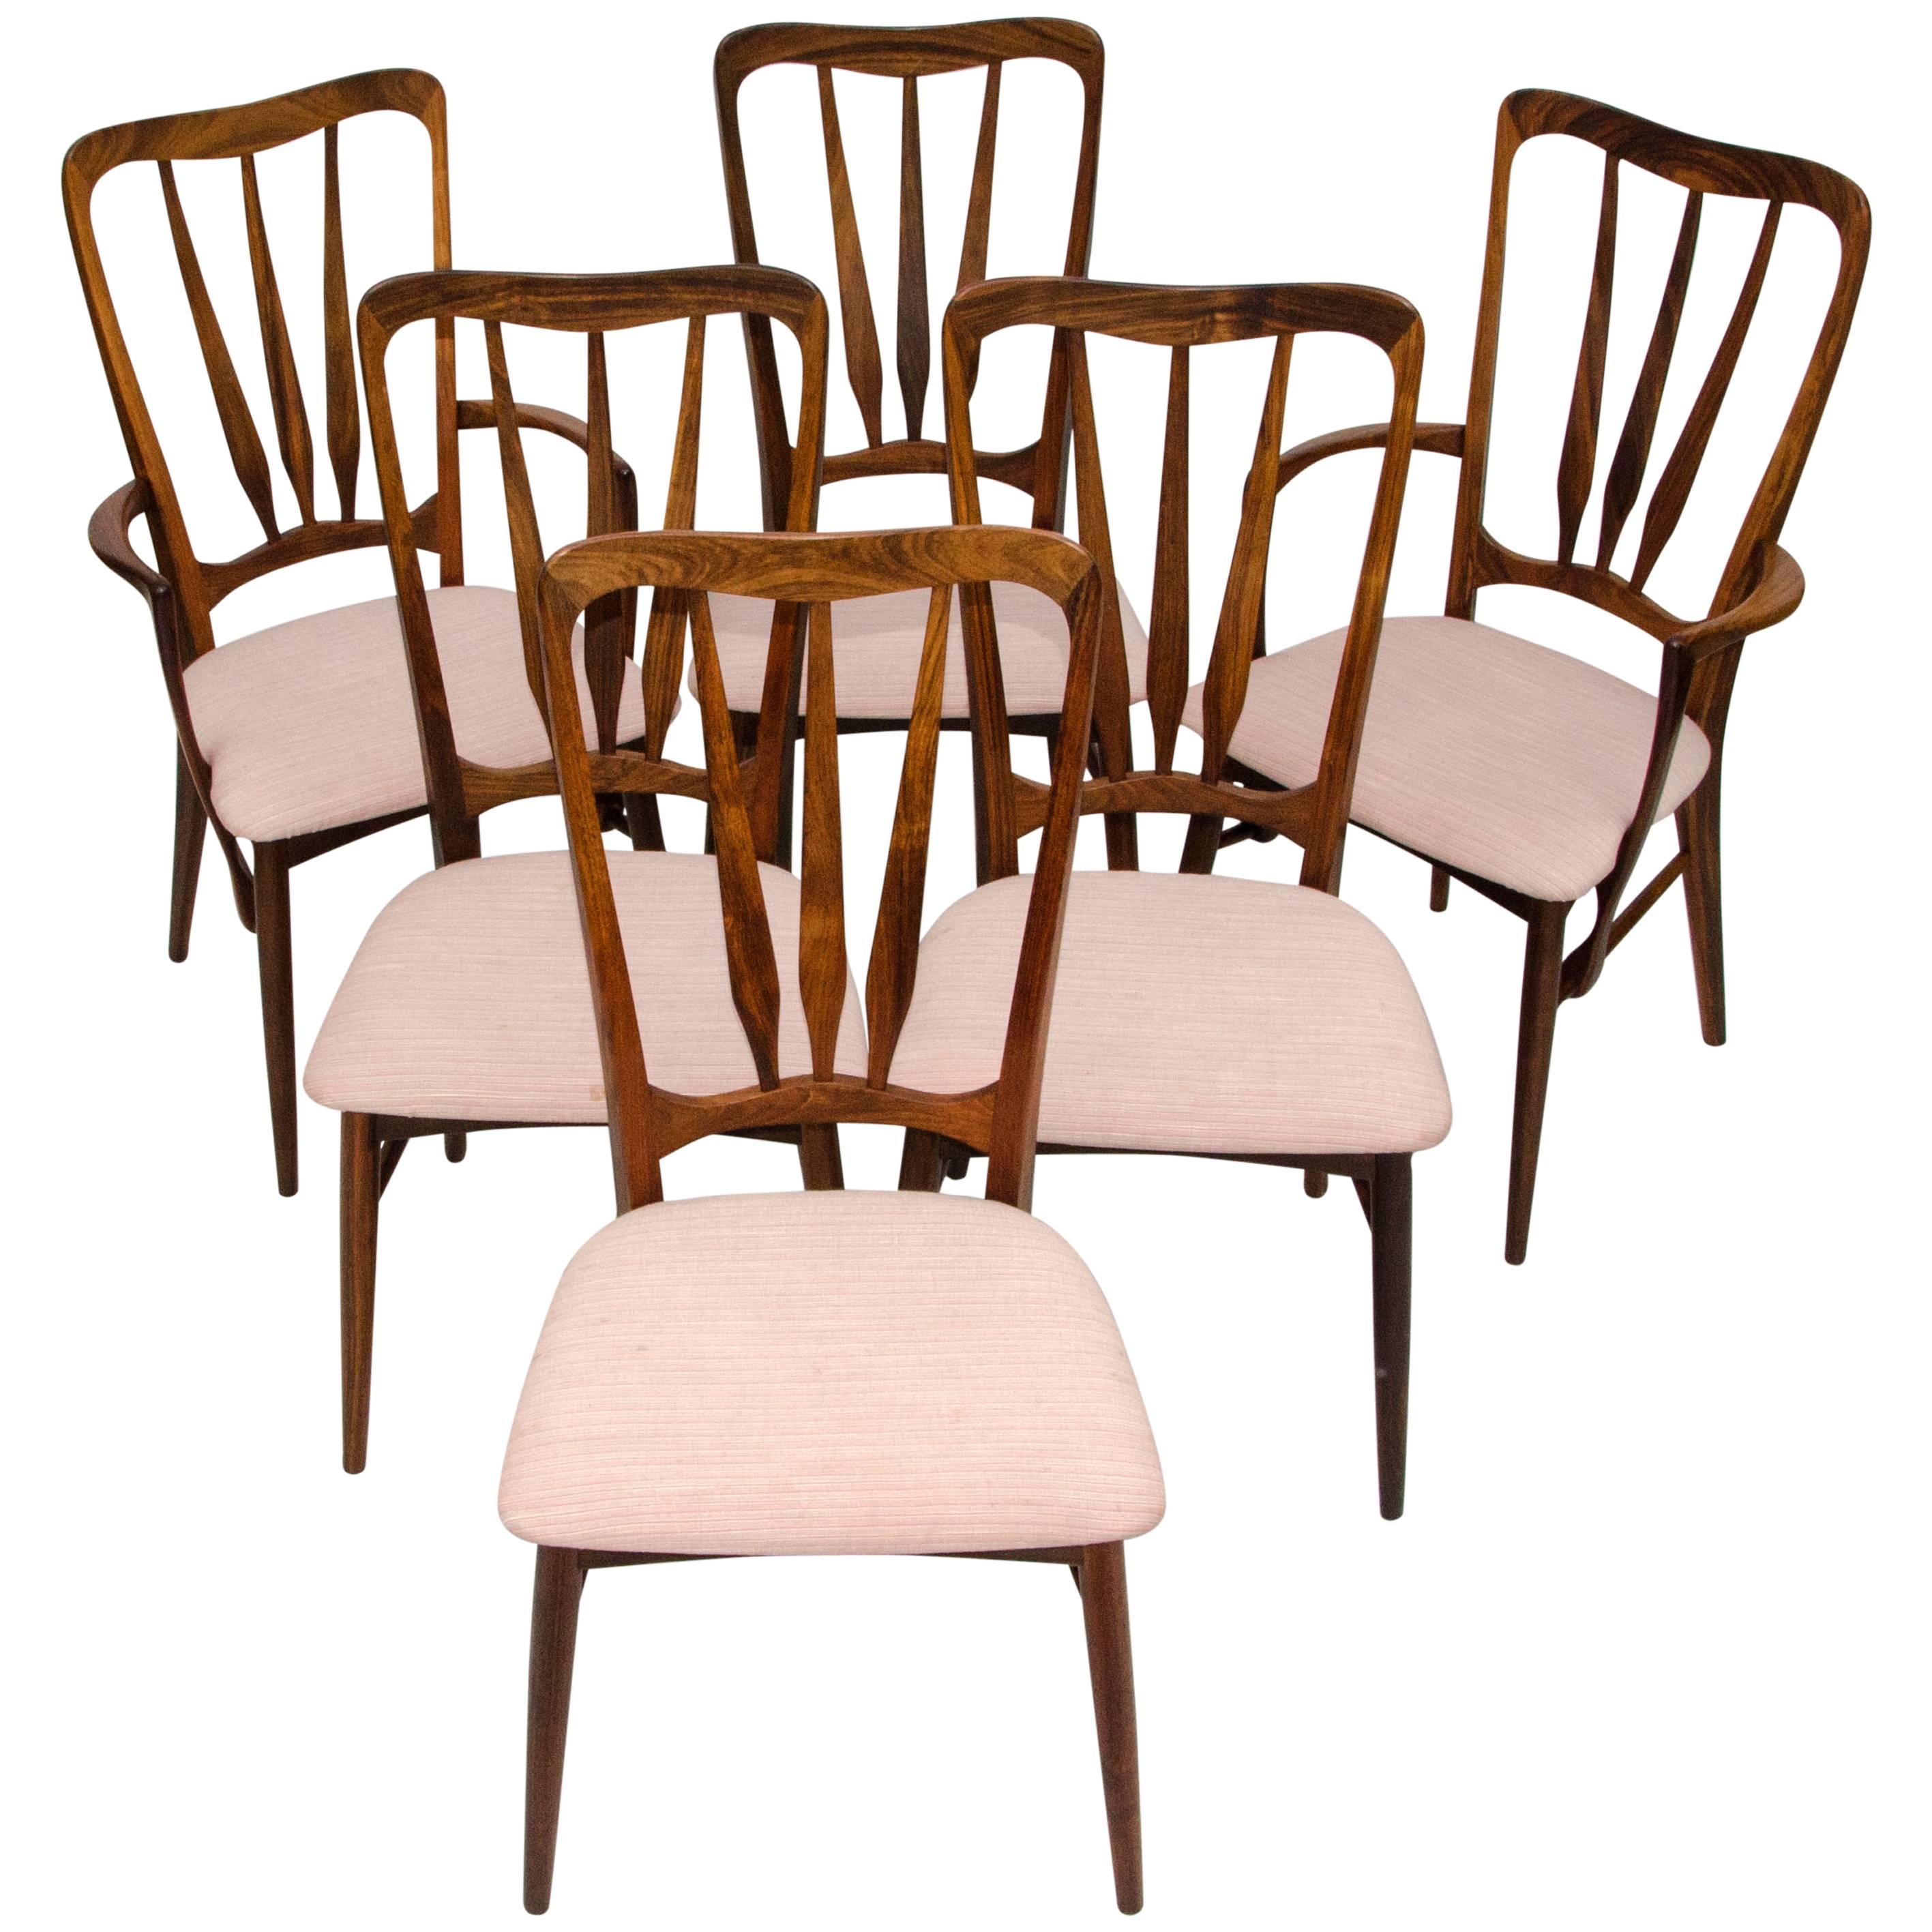 Set of Six Danish "Ingrid" Rosewood Dining Chairs by Koefoeds Hornslet